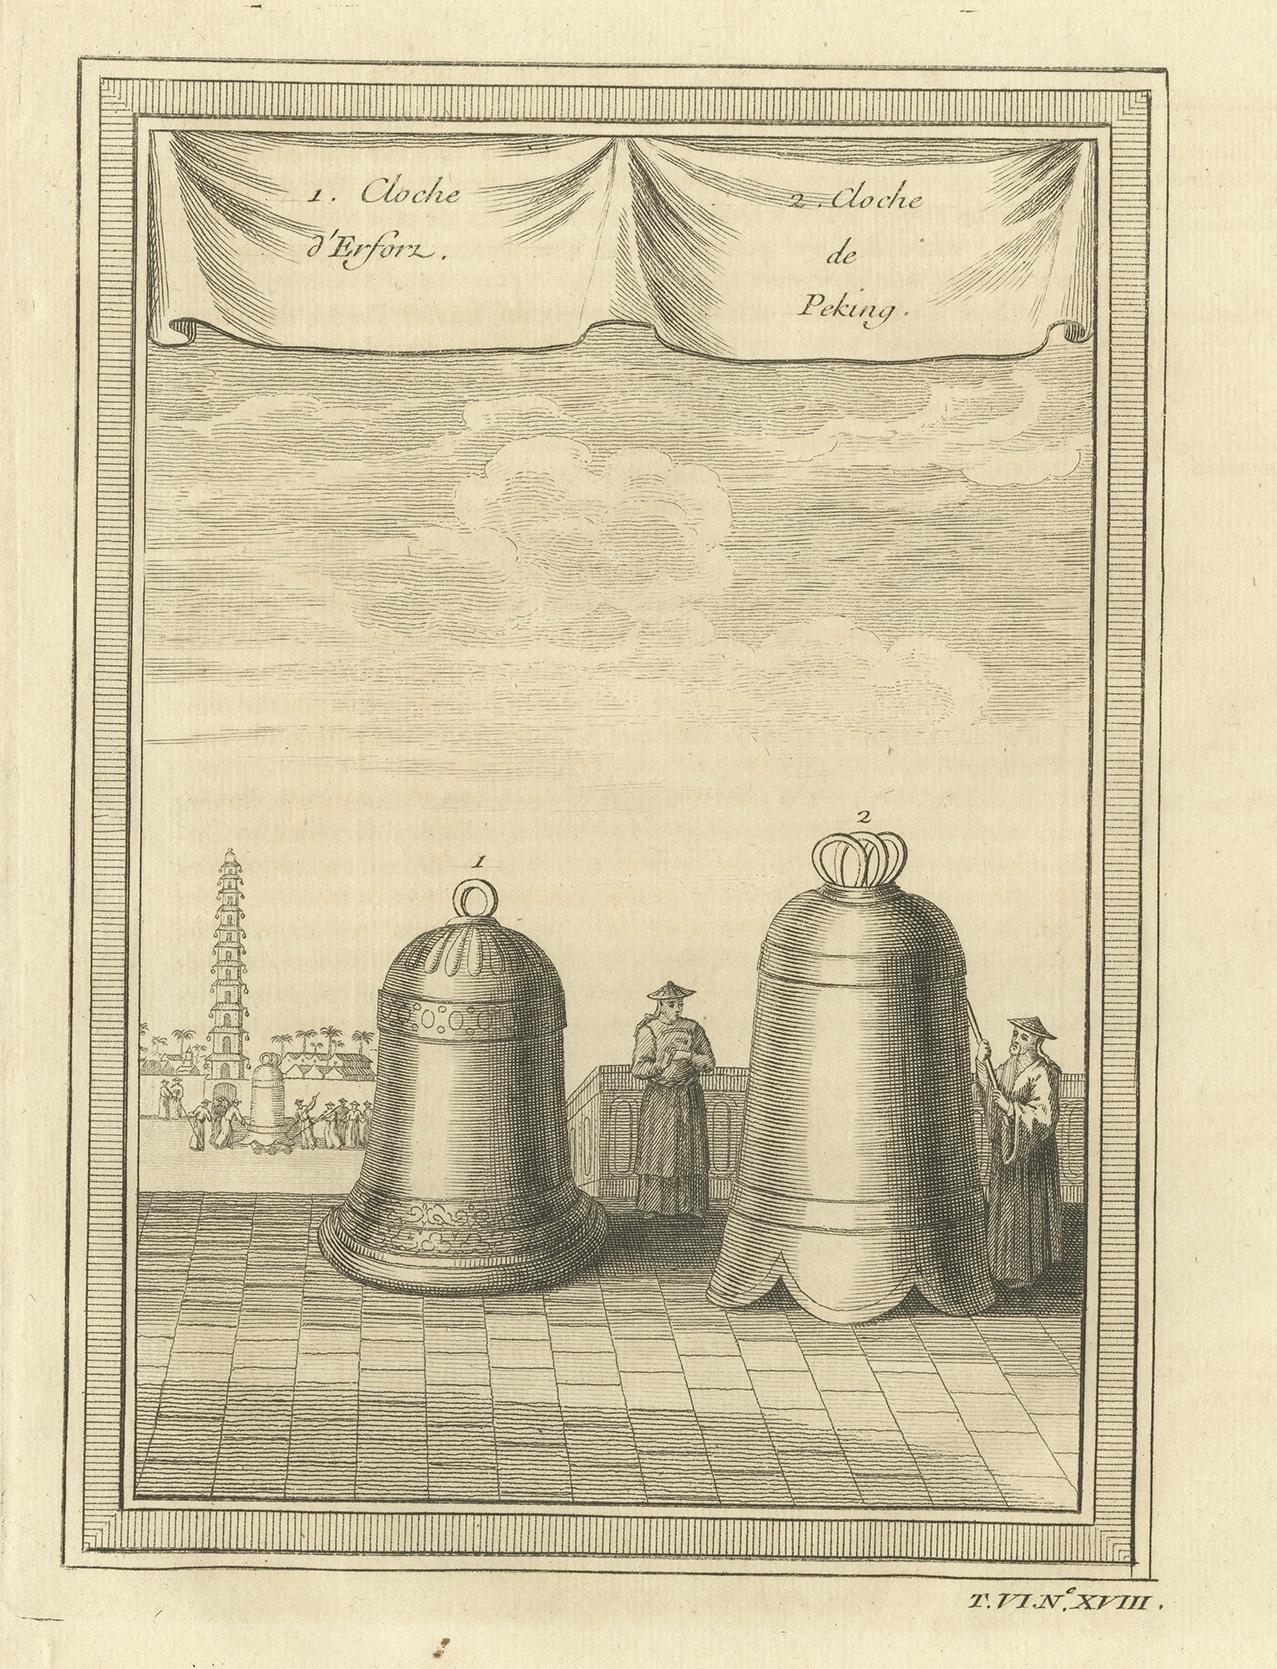 Antique print titled 'Cloche d'Erforz - Cloche de Peking'. Print of two Chinese bells, one from Peking (Beijing). This print originates from Prevost's 'Histoire Generale des Voyages'.